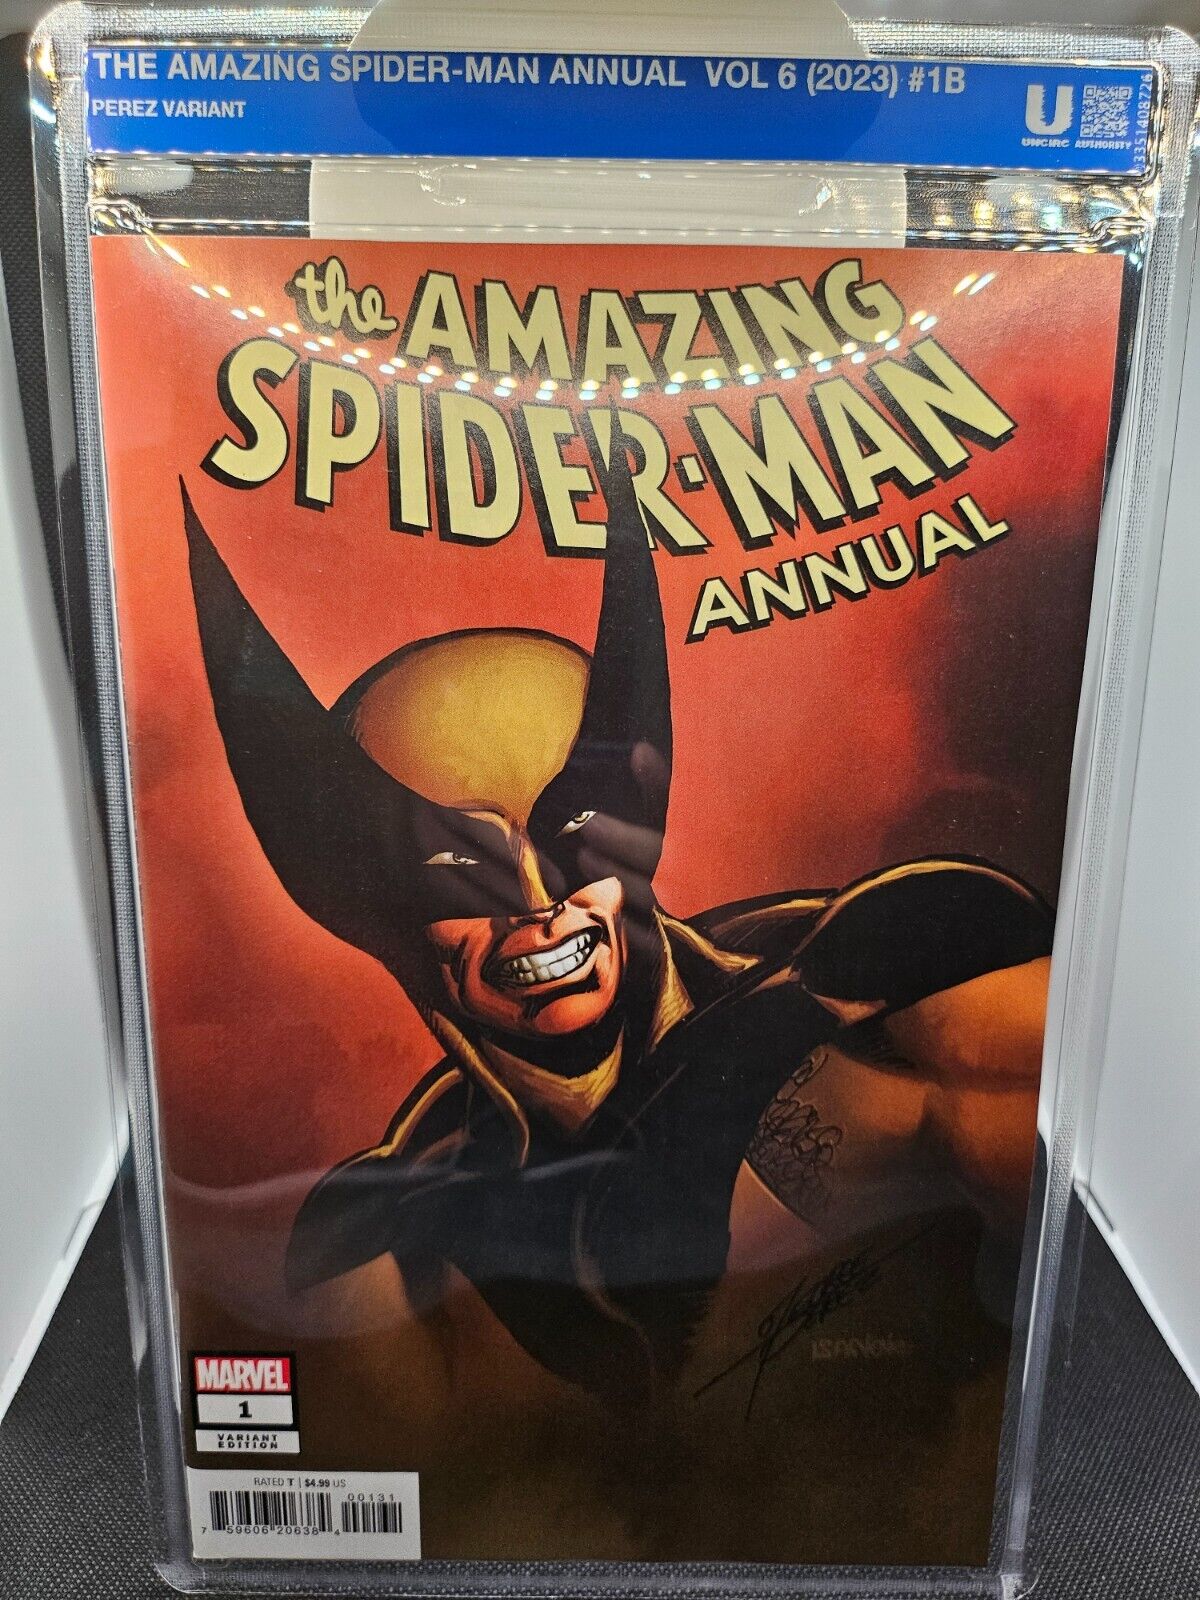 THE AMAZING SPIDER-MAN ANNUAL VOL 6 PEREZ VARIANT UNCIRCULATED RARE #1B